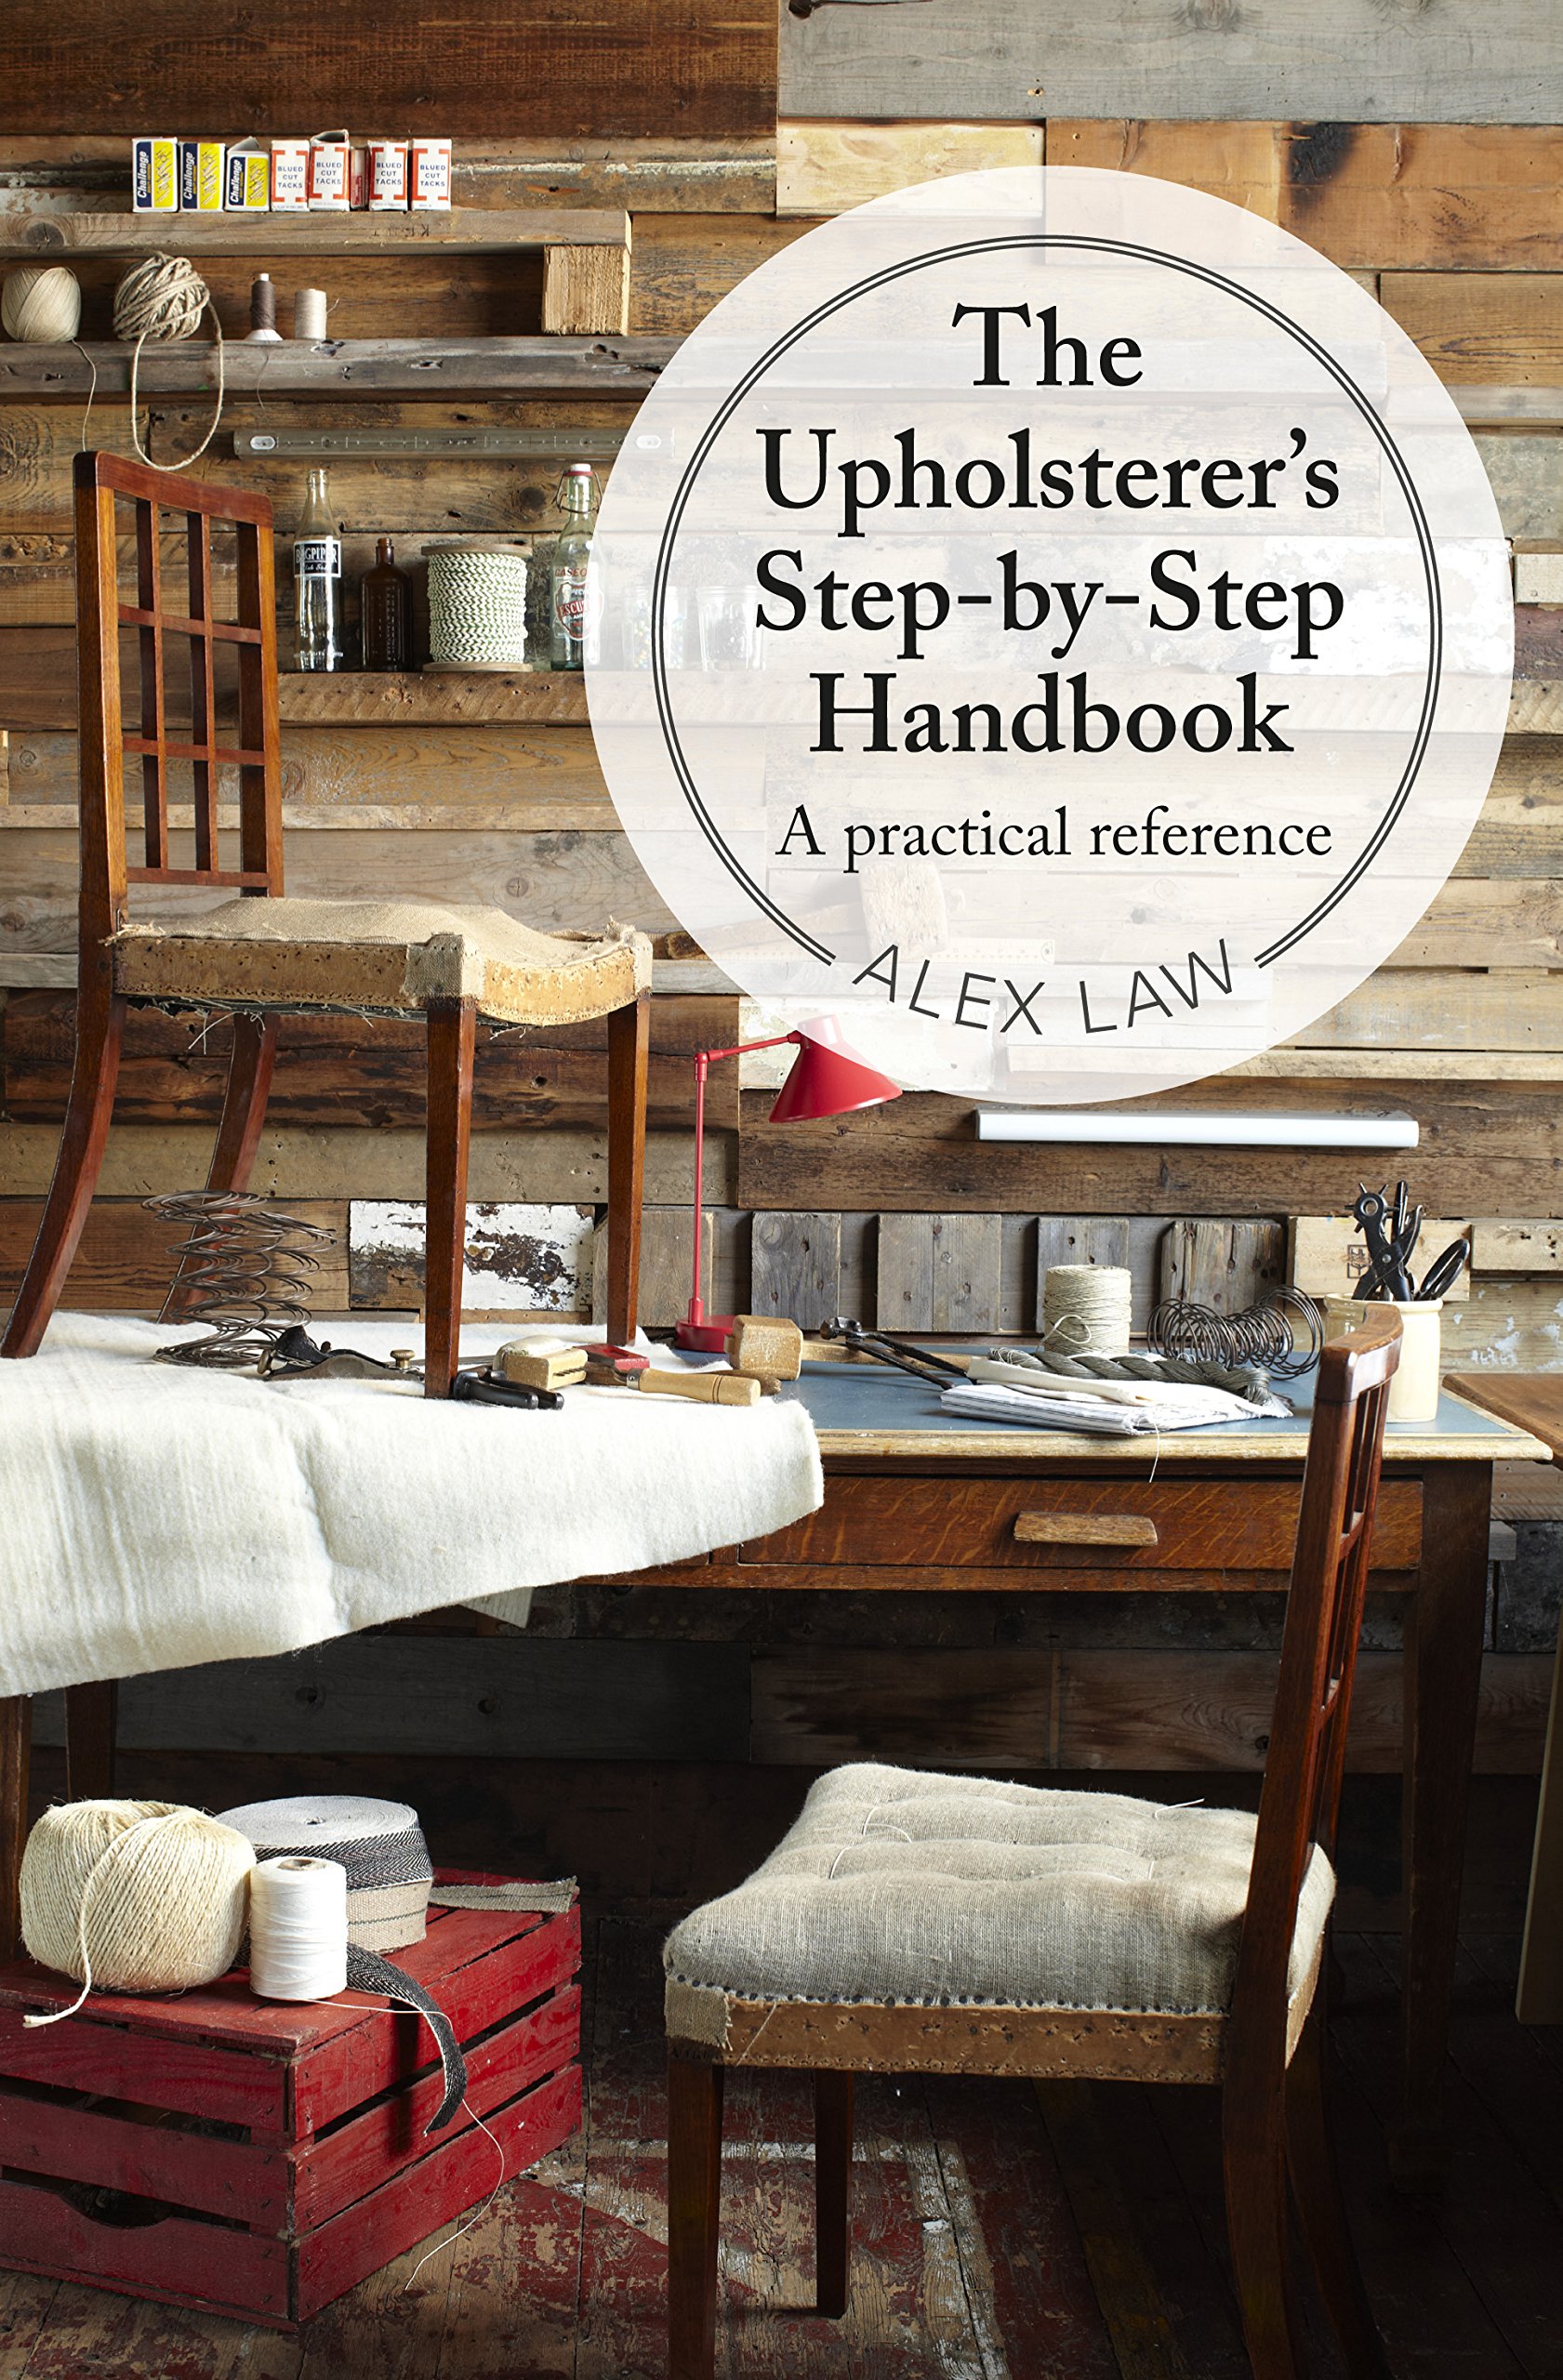 Upholsterer. Step book. Step by Step book. Step by Step book Kathryn l. Schwartz. I bought that book